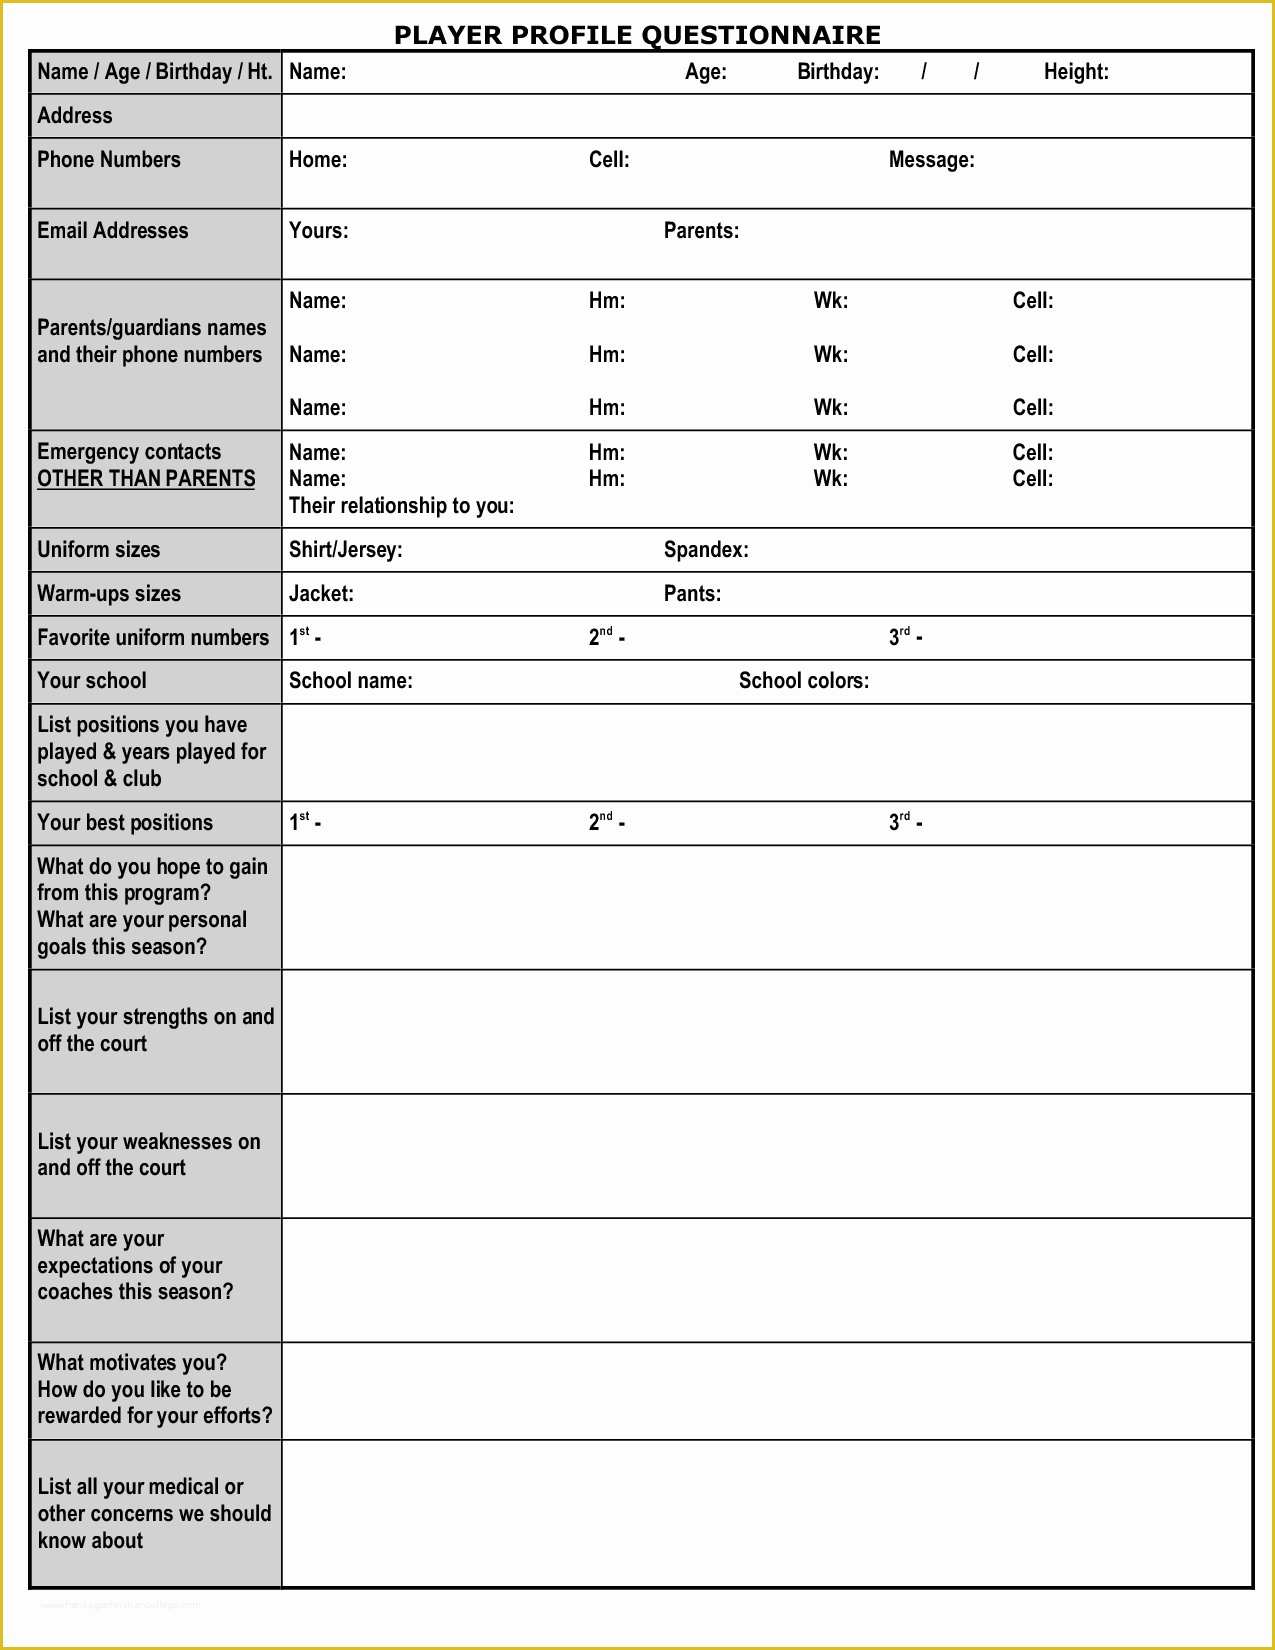 Athlete Profile Template Free Of 28 Of High School soccer Player Profile Template